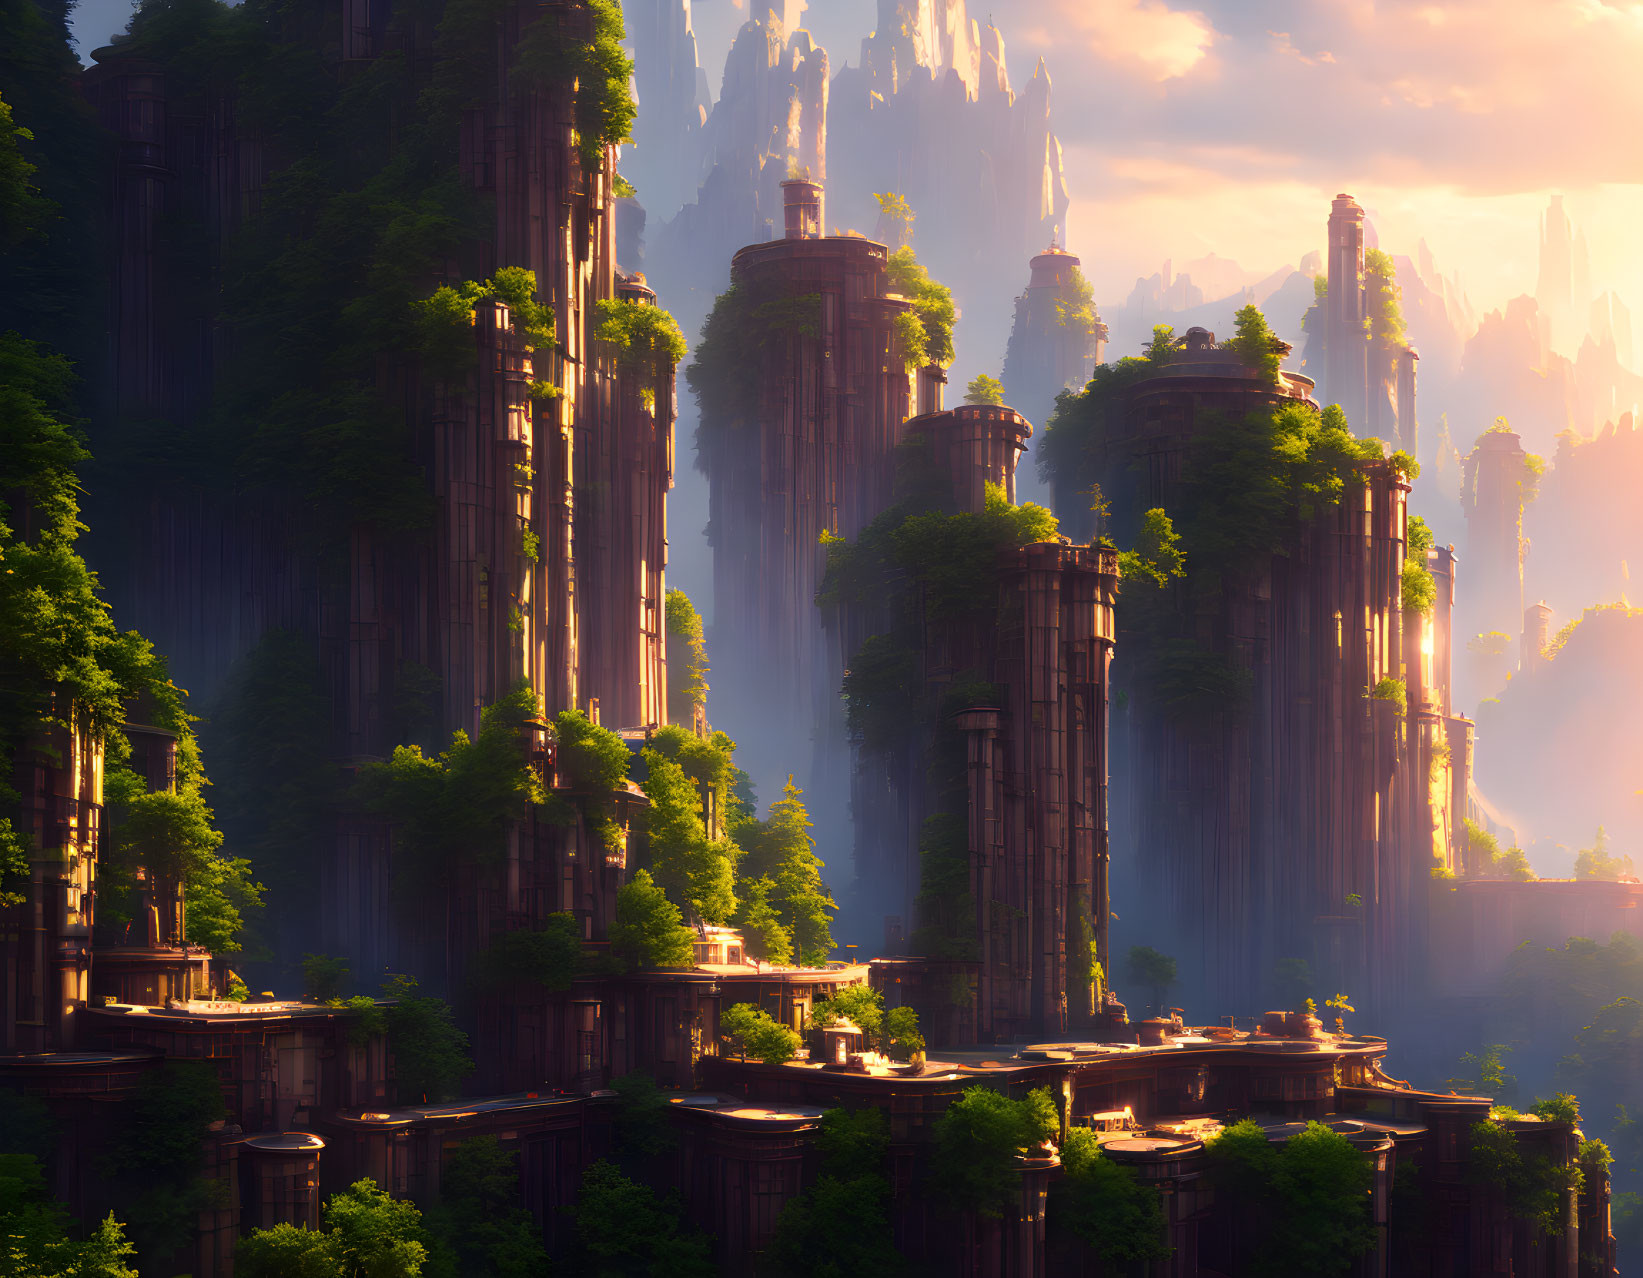 Mystical sunlit fantasy landscape with ancient stone structures amid lush forests